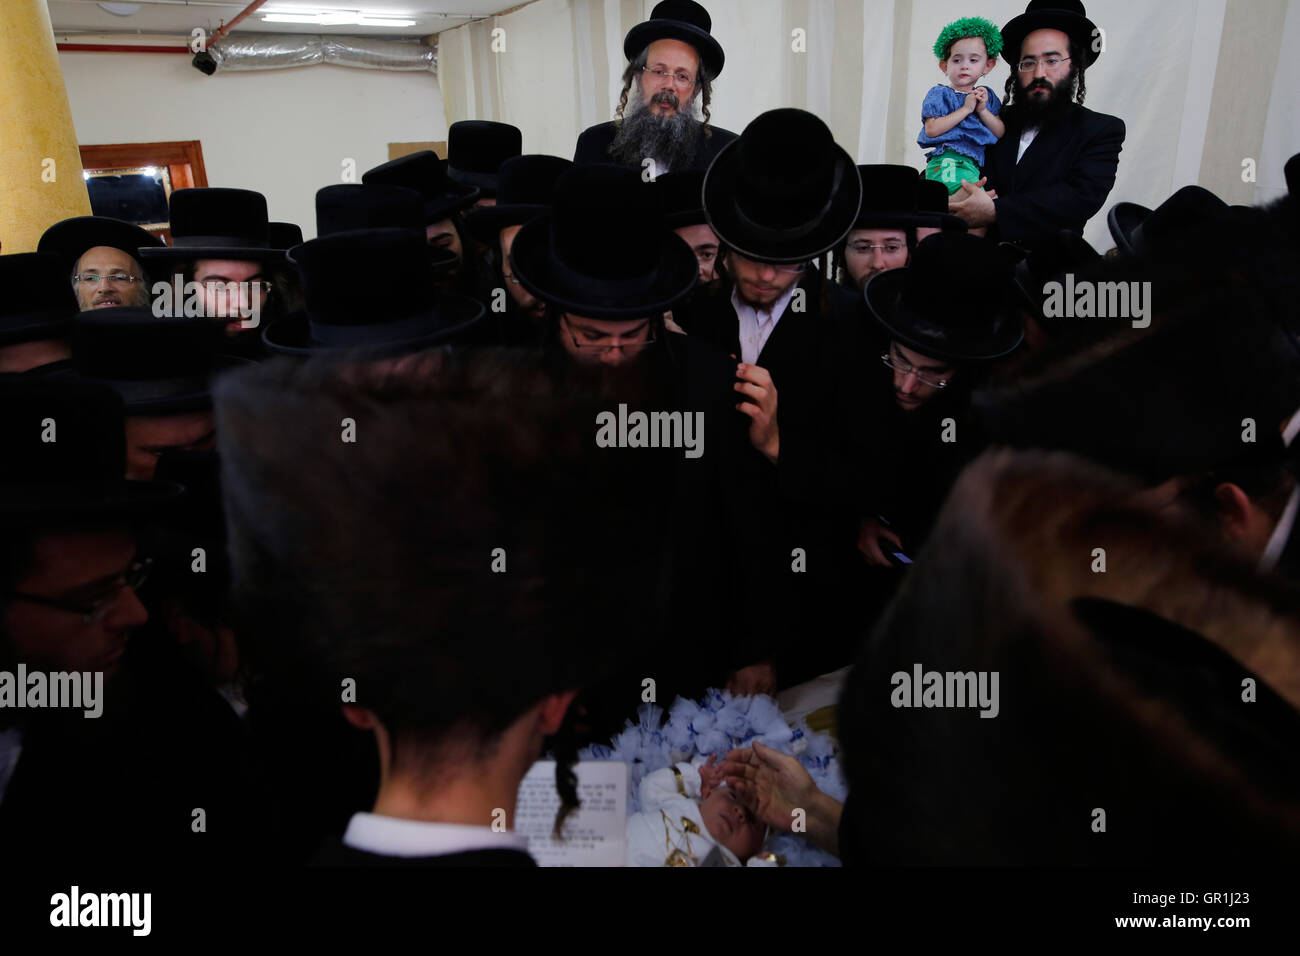 (160907) -- REHOVOT, Sept. 7, 2016 (Xinhua) -- Ultra orthodox Jewish men of the Kretchnief Hasidic sect bless a thirty-day-old infant during the 'Pidyon Haben' ceremony at a synagogue in Rehovot, 30 km south of Tel Aviv, Isreal, Sept. 6, 2016. The Pidyon Haben, or redemption of the first-born son, is a mitzvah in Judaism whereby a Jewish firstborn son is redeemed by use of silver coins from his birth-state of sanctity.  (Xinhua/Gil Cohen Magen) Stock Photo